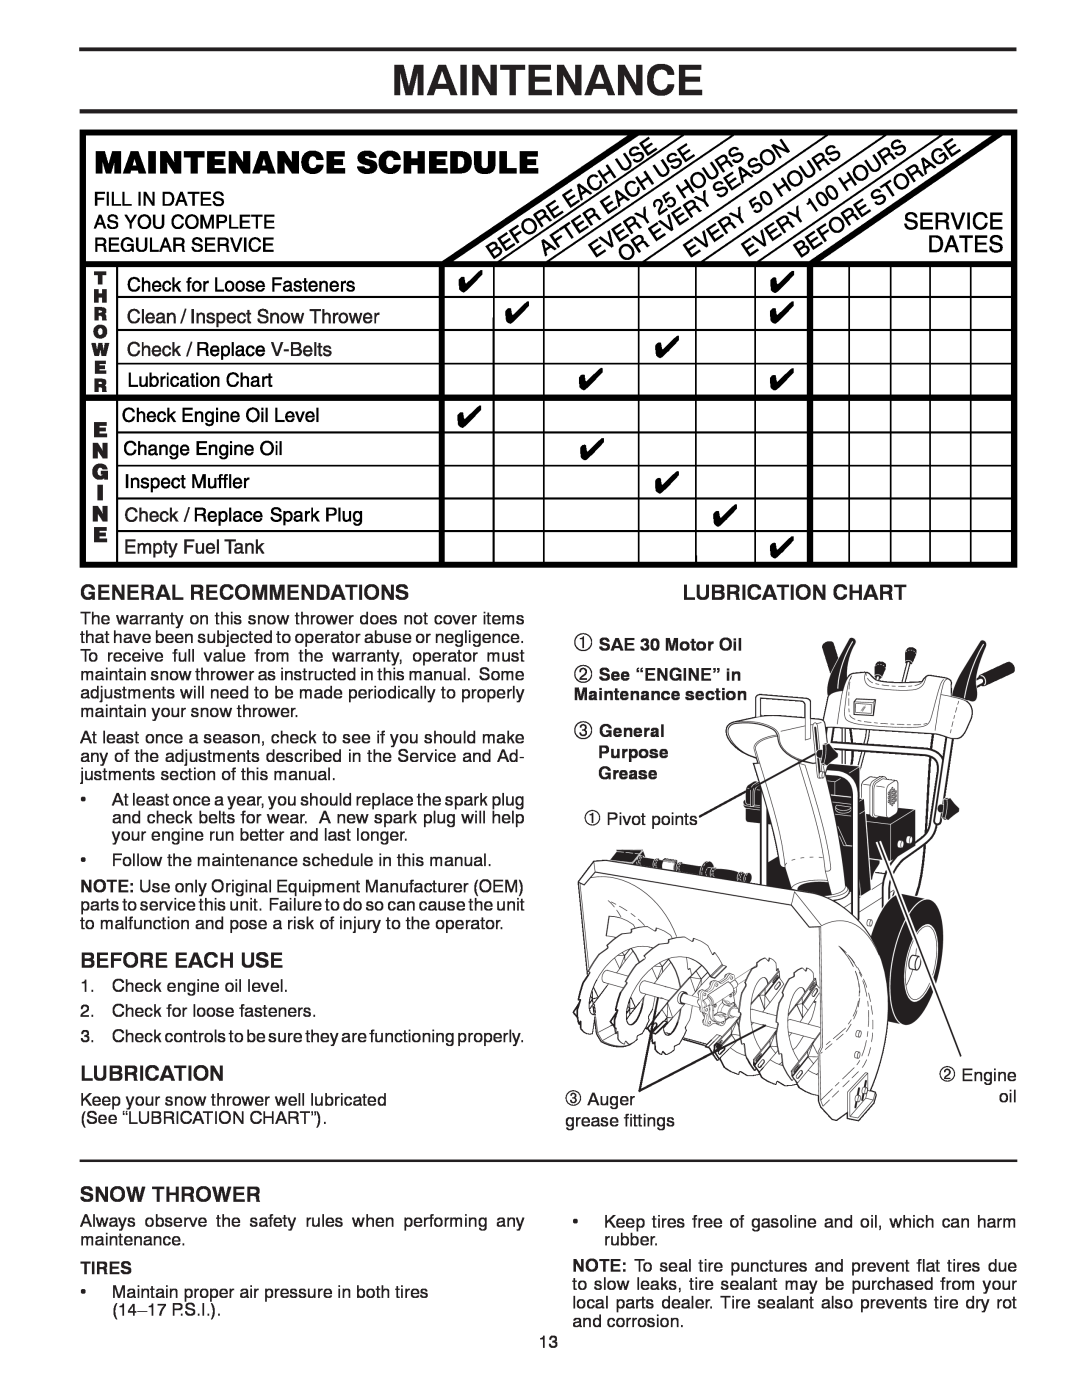 McCulloch MC12527ES Maintenance, General Recommendations, Before Each Use, Snow Thrower, Lubrication Chart, Tires 